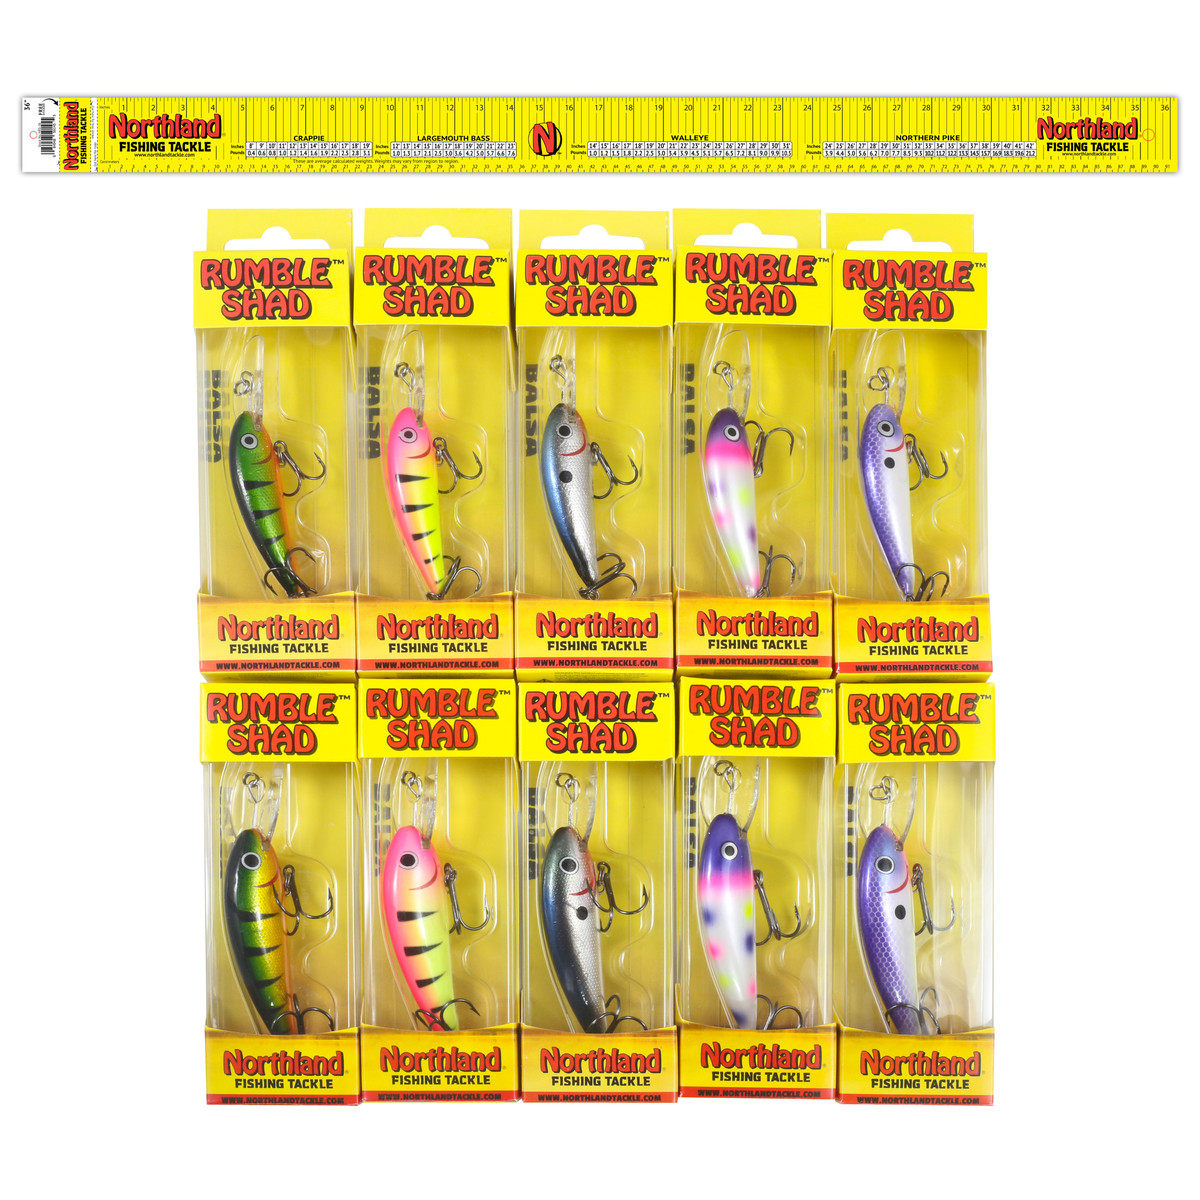 Rumble Shad Kit (Gift Guide)